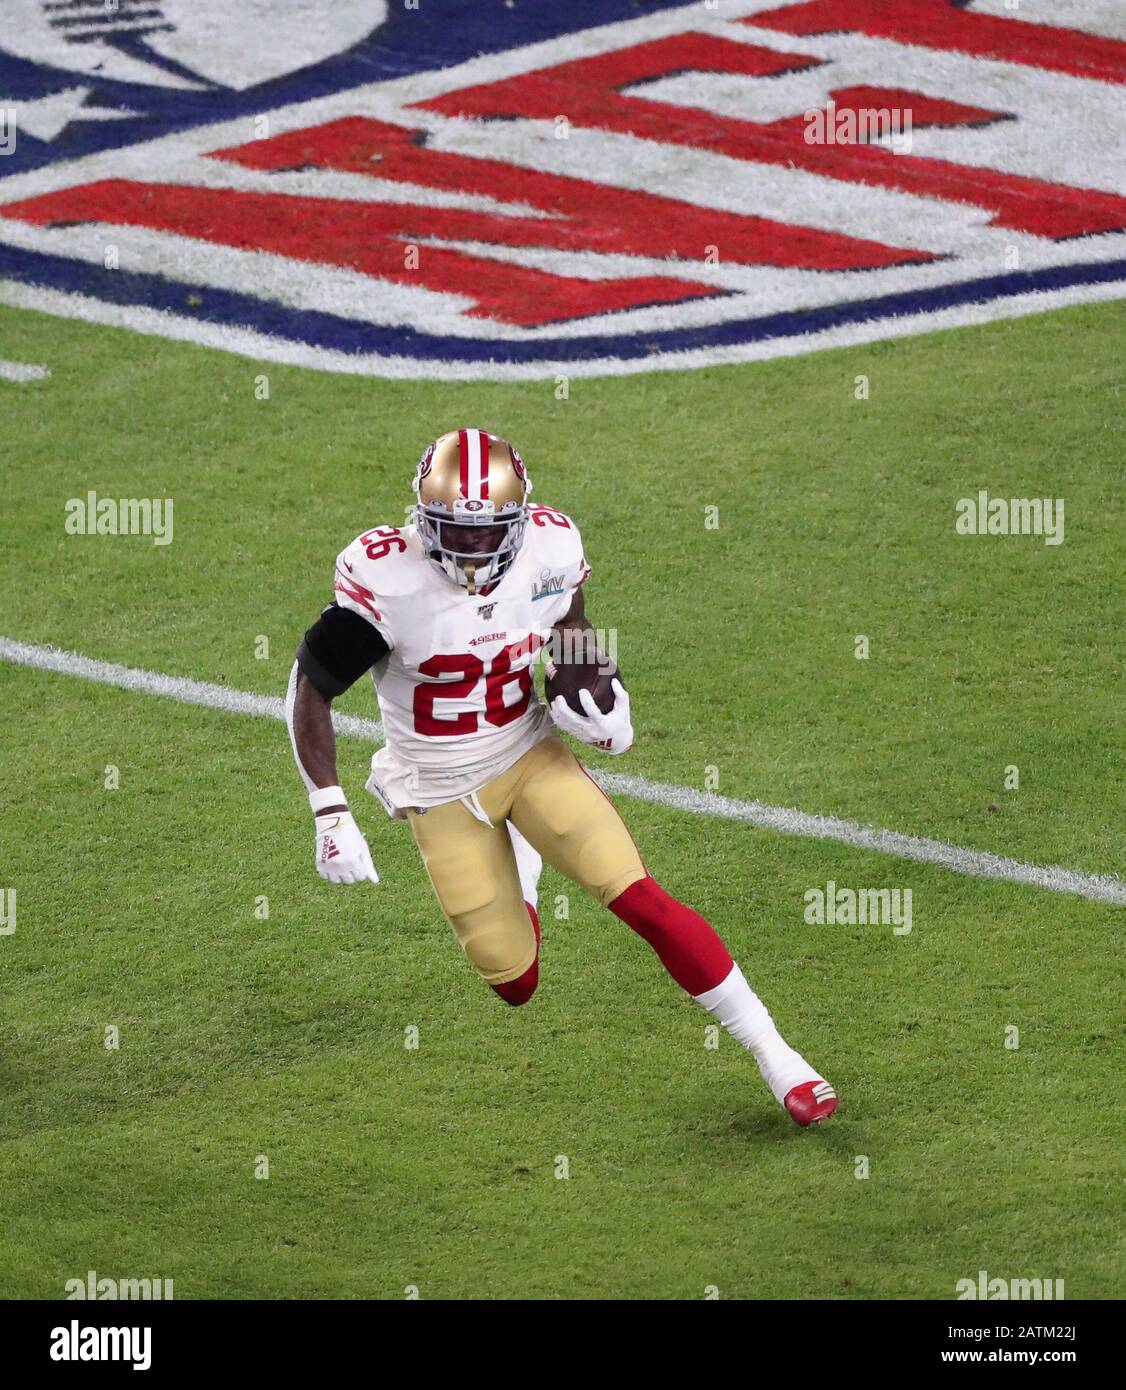 Miami Gardens, Florida, USA. 02nd Feb, 2020. San Francisco 49ers running back Tevin Coleman (26) runs with the ball during the Super Bowl LIV game against the Kansas City Chiefs at the Hard Rock Stadium in Miami Gardens, Florida. Mario Houben/CSM/Alamy Live News Stock Photo